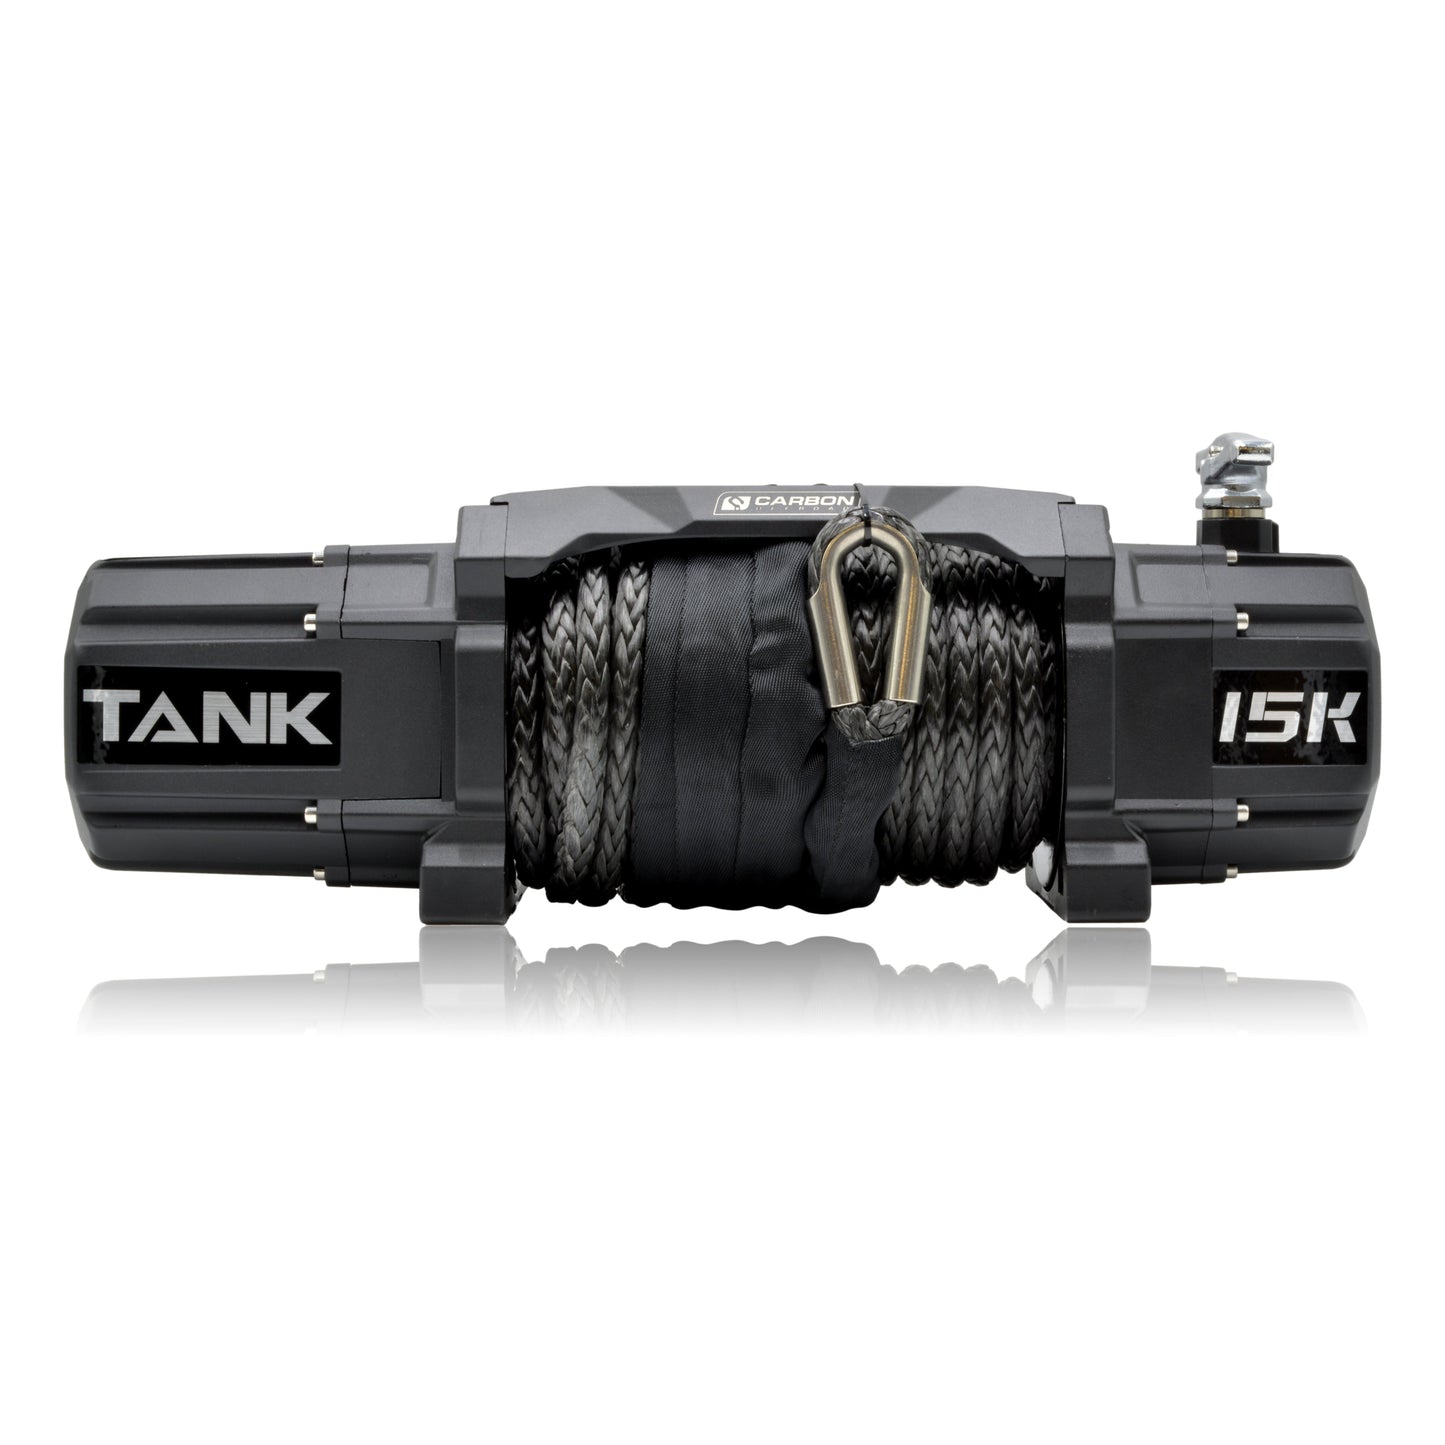 Carbon Tank 15000lb 4x4 Winch Kit IP68 12V and Recovery Combo Deal - CW-TK15-COMBO2 4